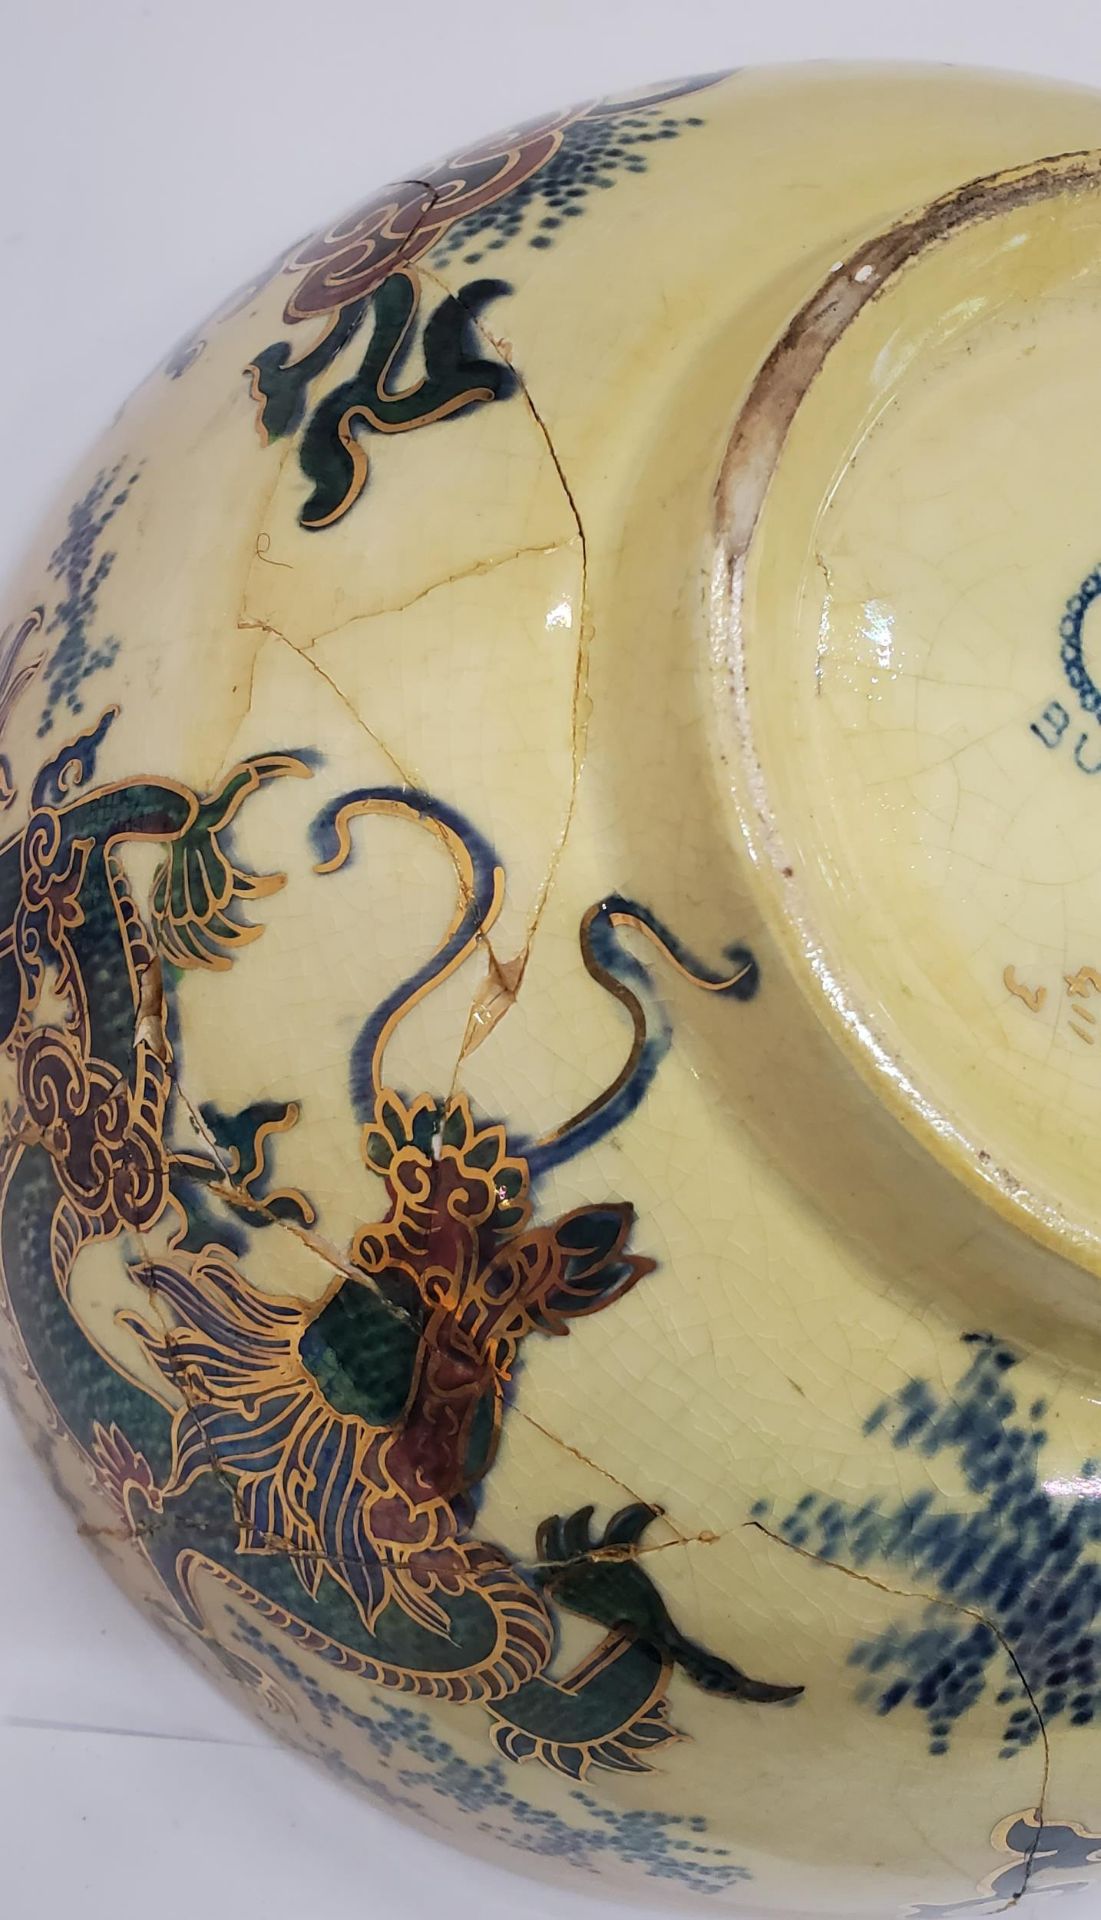 TWO LARGE BOWLS TO INCLUDE A MASON'S ORIENTAL PATTERNED AND A BURSLEY WARE 'DRAGON' - BOTH A/F - Image 9 of 9